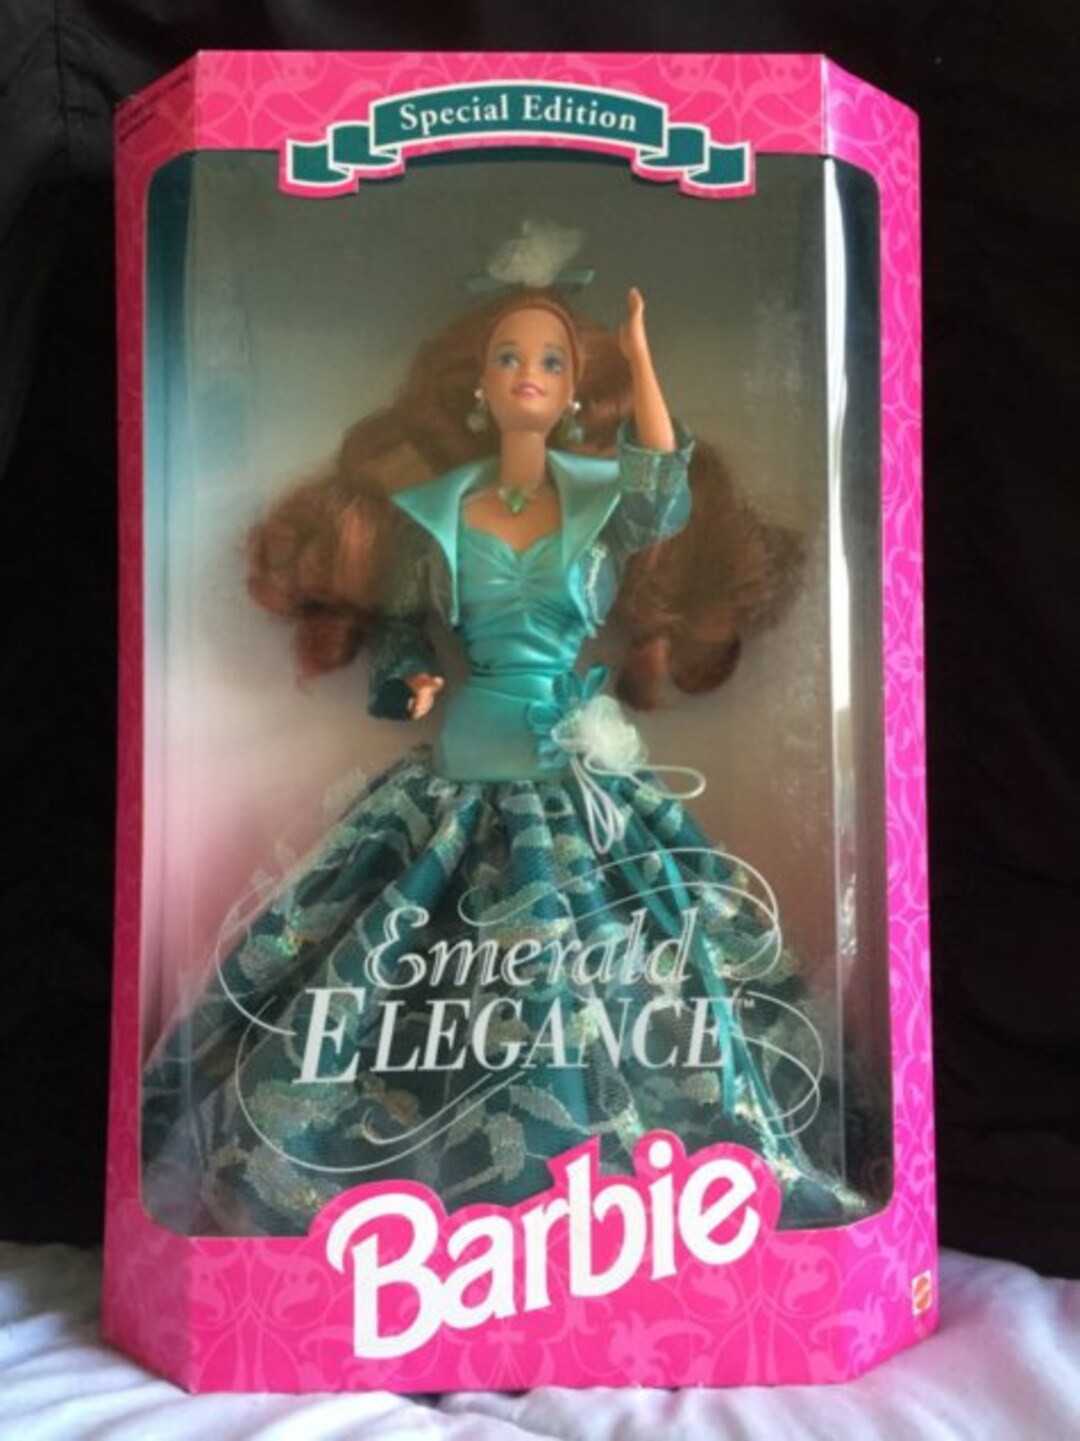 Emerald Elegance Barbie 1994 Special Edition Vintage New in Etsy